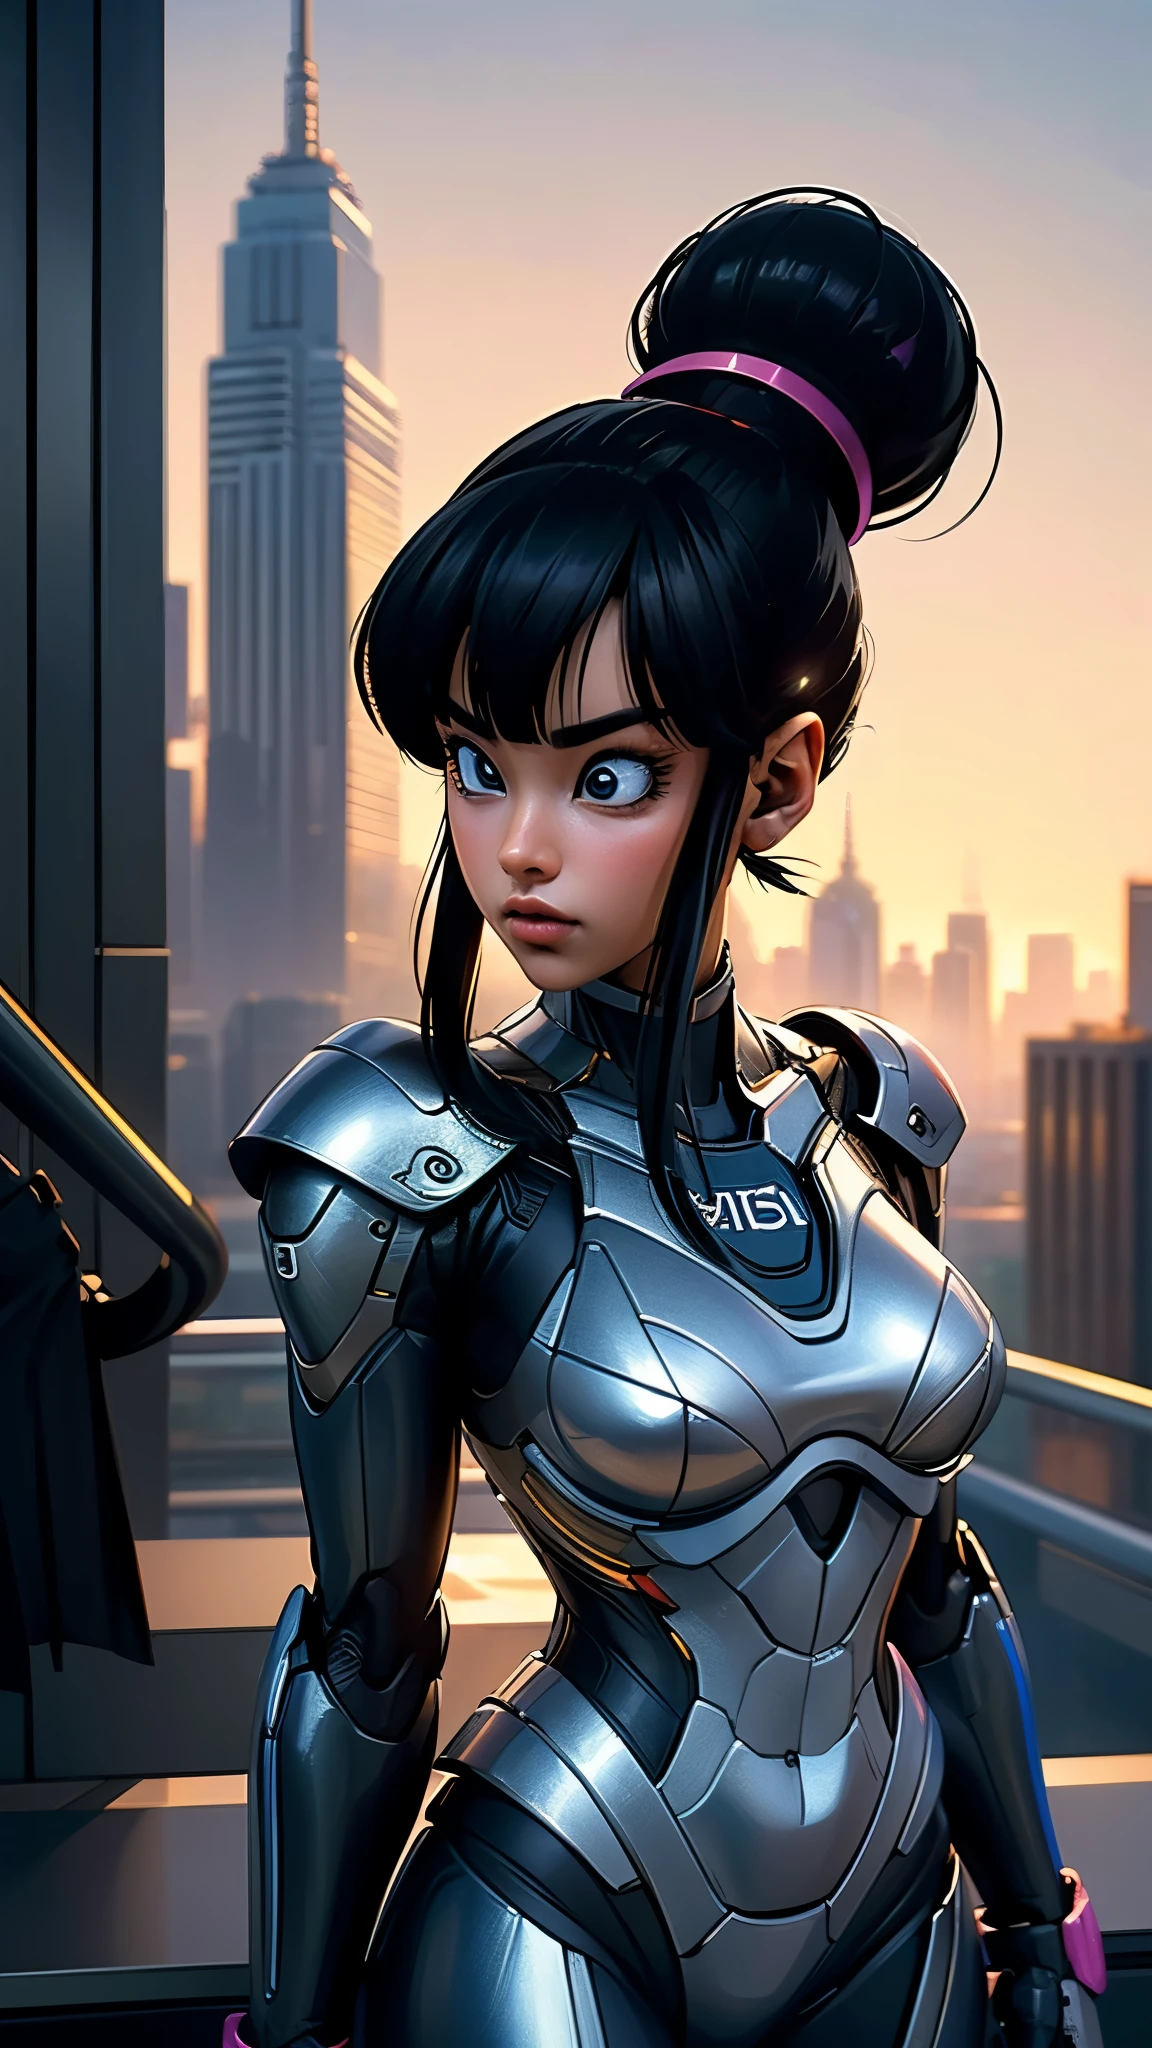 A girl with chi chi features combined with a robot, standing in a futuristic cityscape, mesmerizing onlookers. The girl has beautiful detailed eyes, beautiful detailed lips, and an extremely detailed face. She has long eyelashes that add to her charm. The robot is made of polished metallic material, giving it a sleek and modern appearance. The cityscape is depicted in an ultra-detailed style, showcasing towering skyscrapers, advanced technology, and flying vehicles. The colors used are vivid and vibrant, with a futuristic color palette that includes neon lights and bright accents. The lighting in the scene is reminiscent of a sunset, casting a warm glow across the city. The overall image quality is of the best quality, with a resolution of 4k or 8k, and it aims to be a masterpiece in its level of detail and artistry. The prompt also specifies that the image should be realistic or photorealistic, capturing the intricacies of the girl's features and the robot's design.